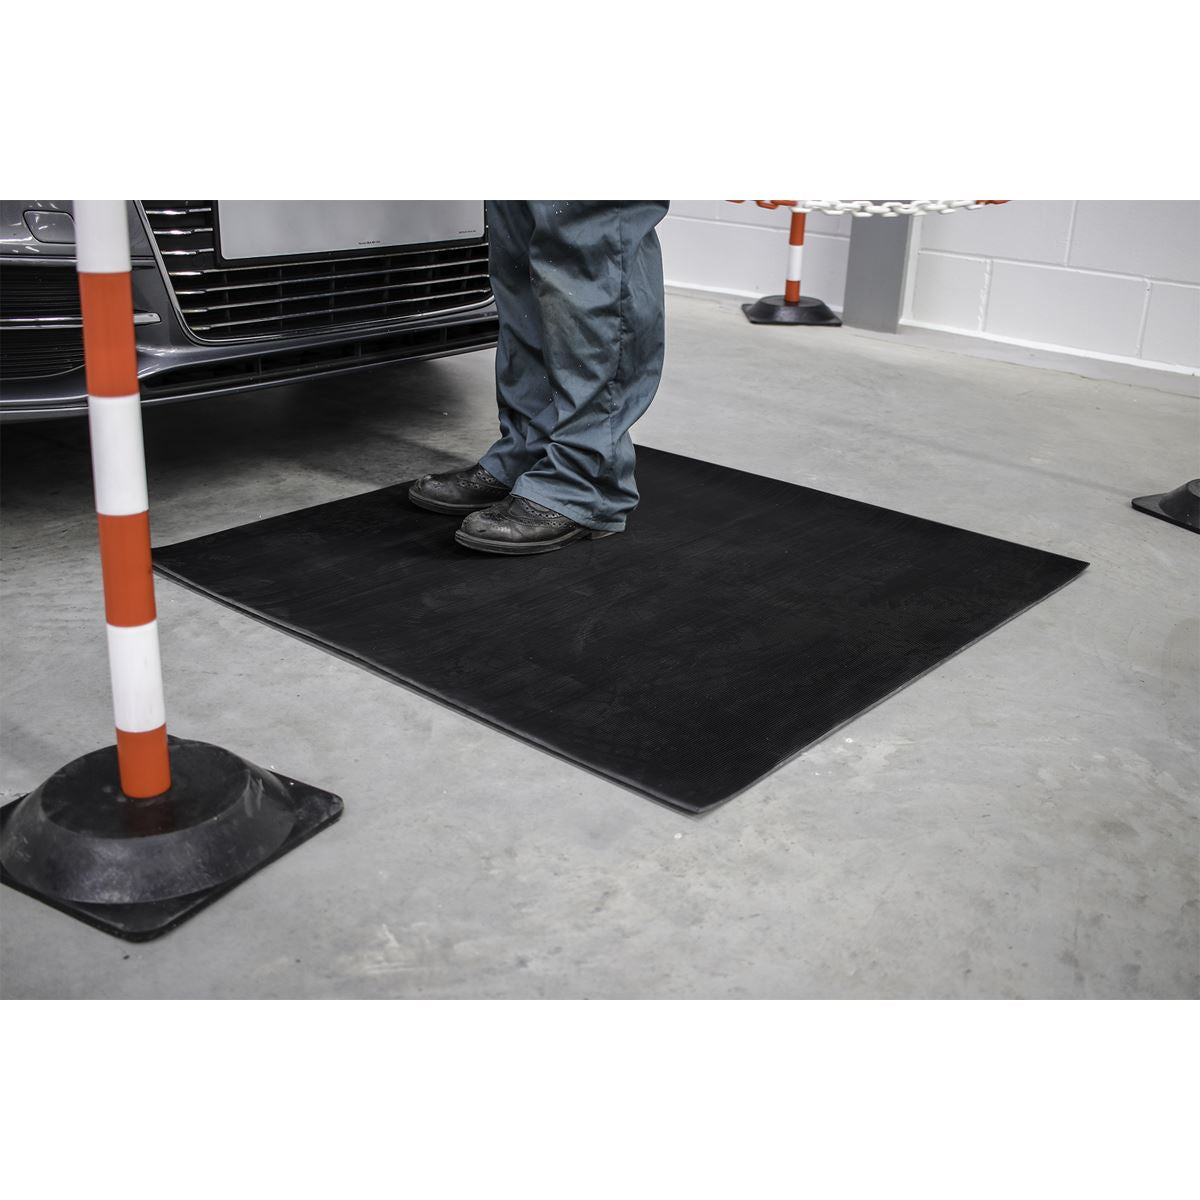 Sealey Electrician's Insulating Rubber Safety Mat 1 x 1m